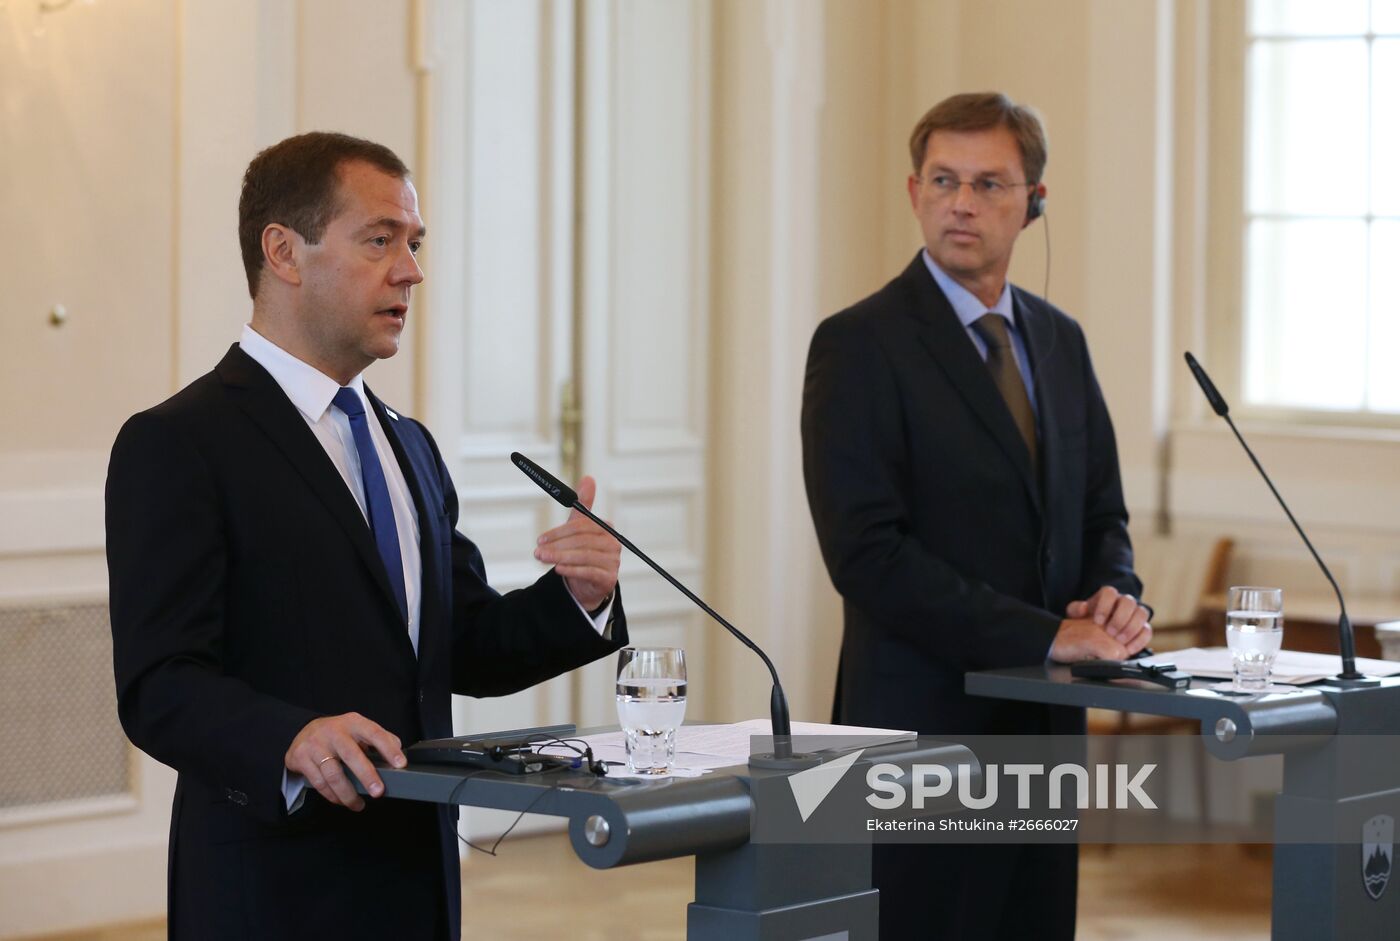 Russian Prime Minister Dmitry Medvedev visits Slovenia. Day Two